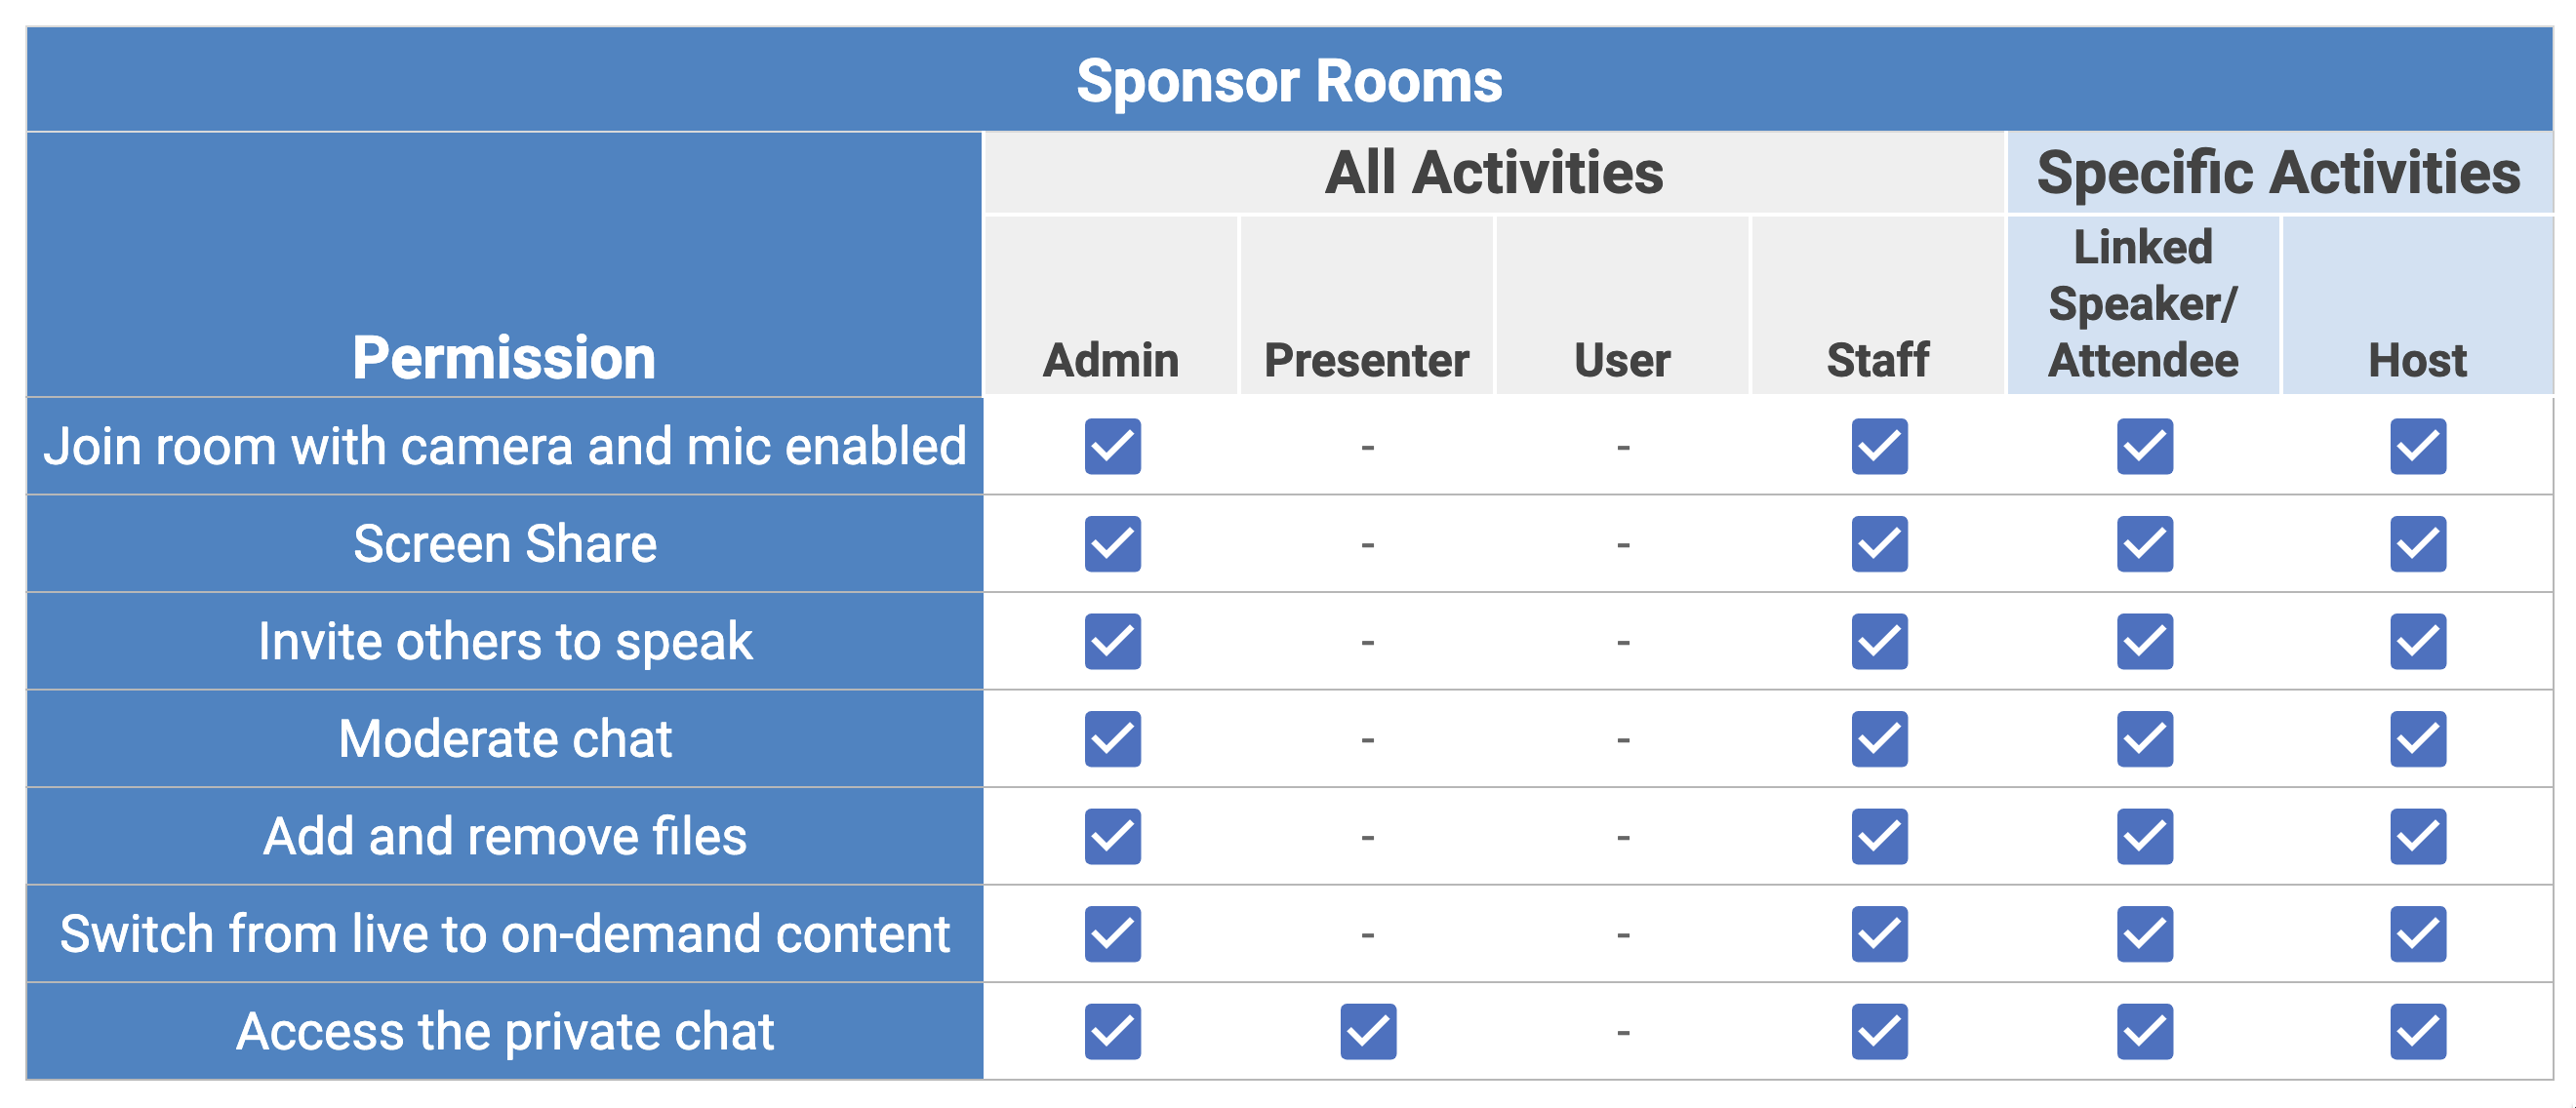 Permissions for sponsor rooms